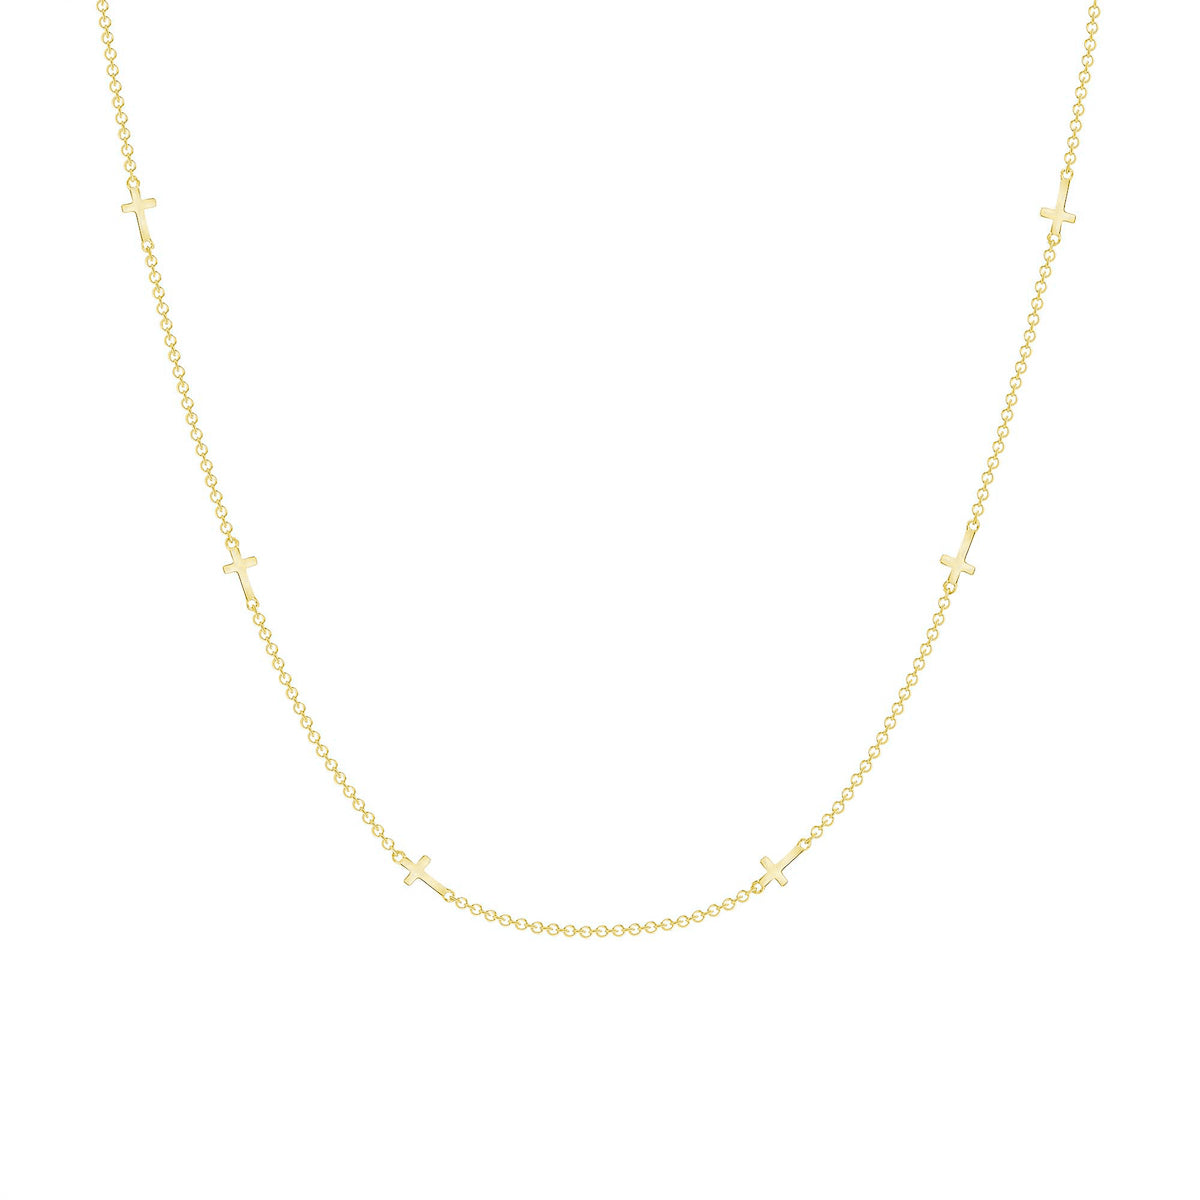 Dainty Lock & Key 14K Yellow Gold Necklace | Nob Hill Jewelry Stores | Gold Necklaces | New Mexico — Gold Necklaces | Ooh Aah Jewelry | Nob Hill 